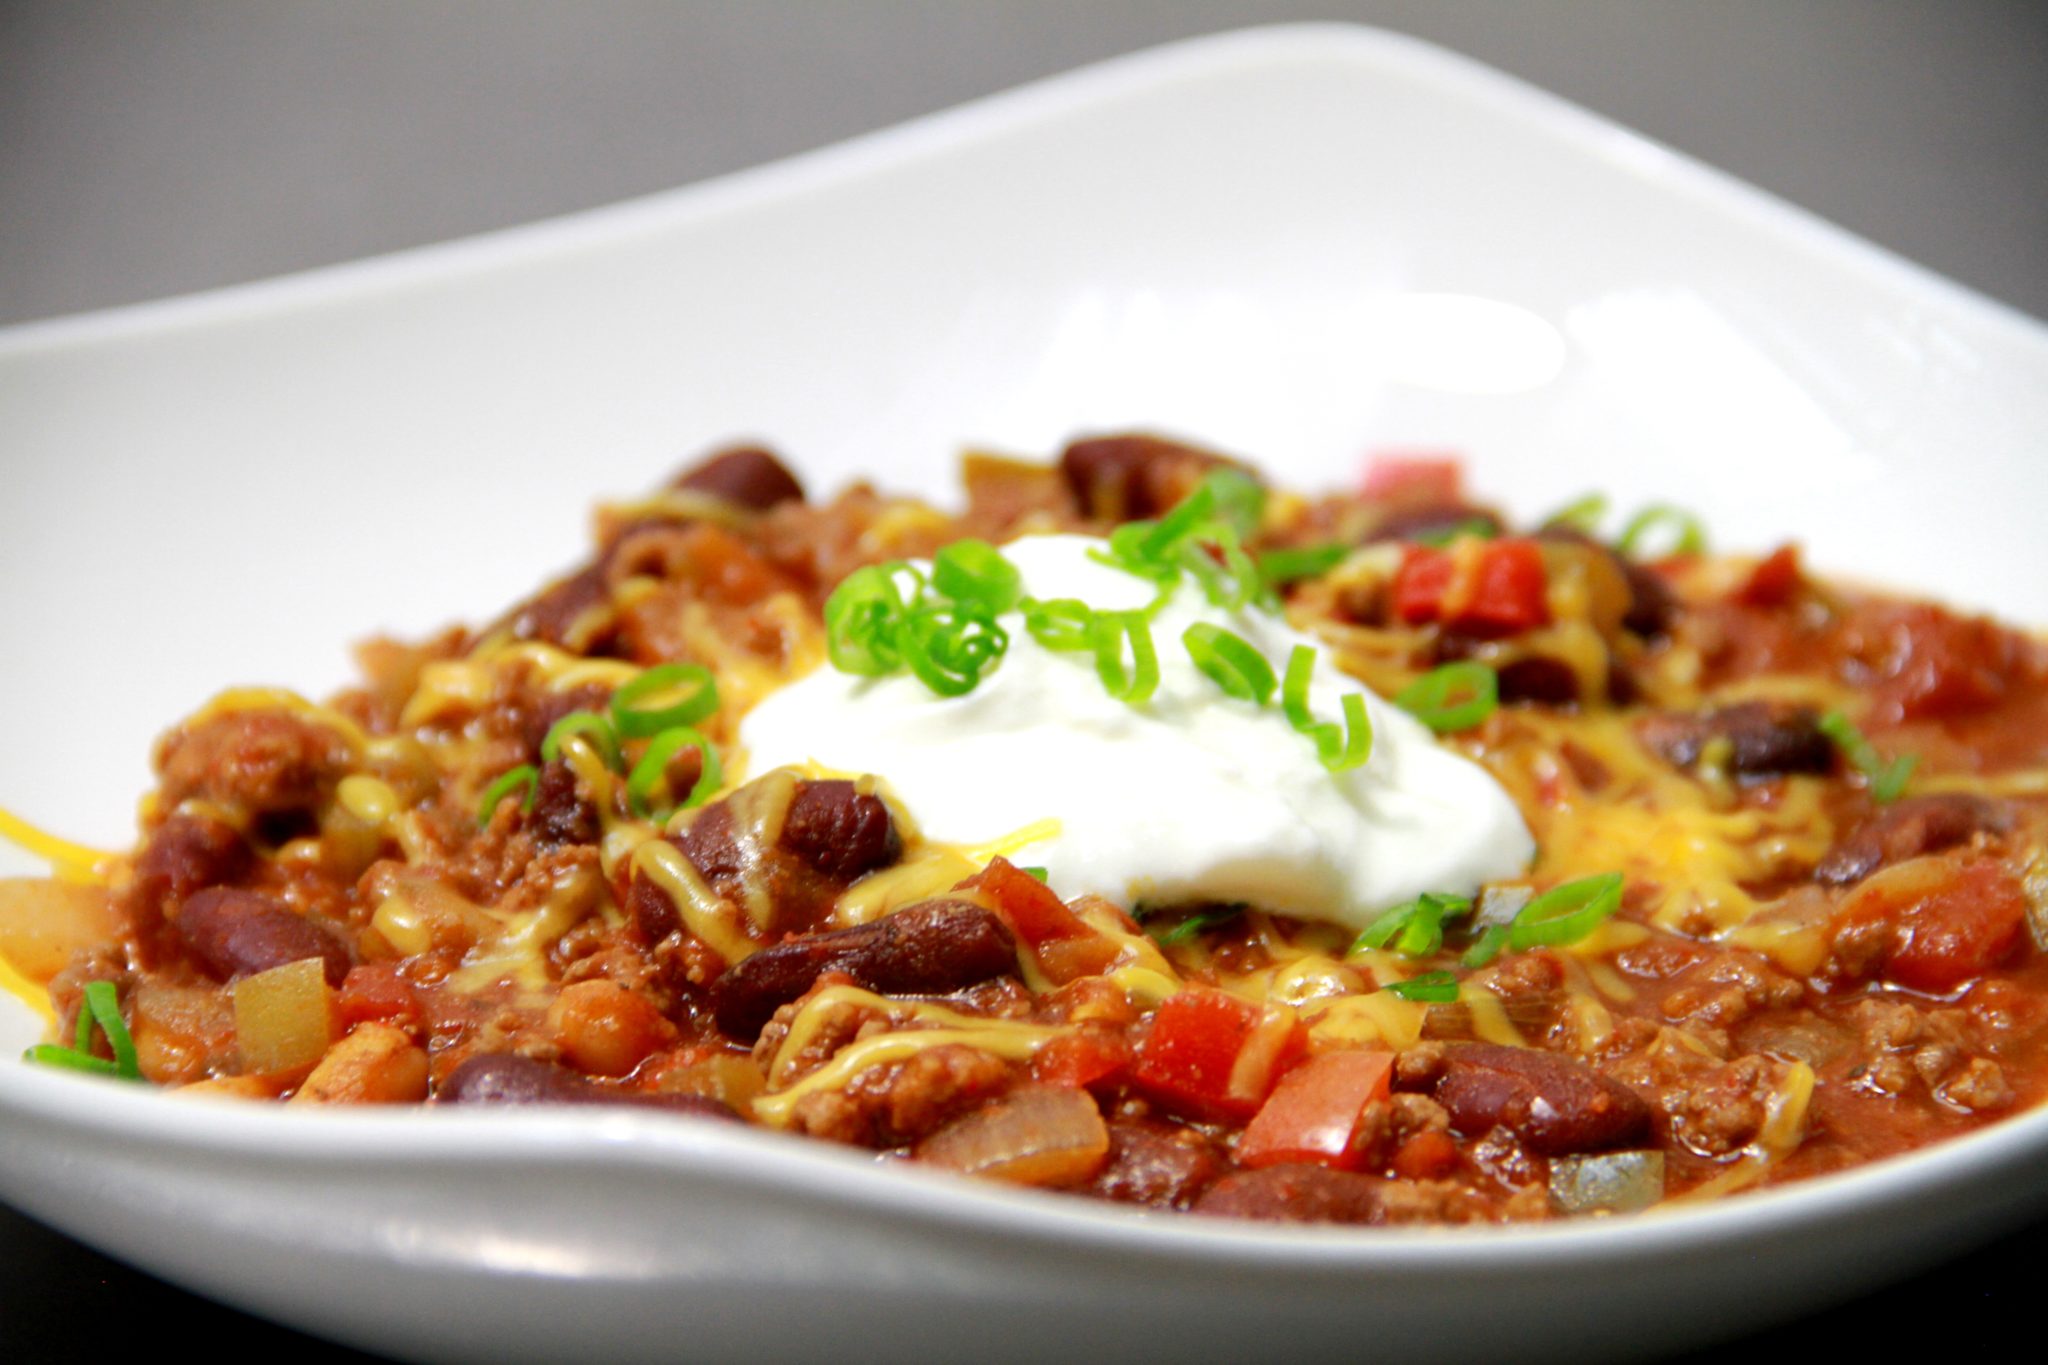 How to Make Tailgating Chili - Escoffier